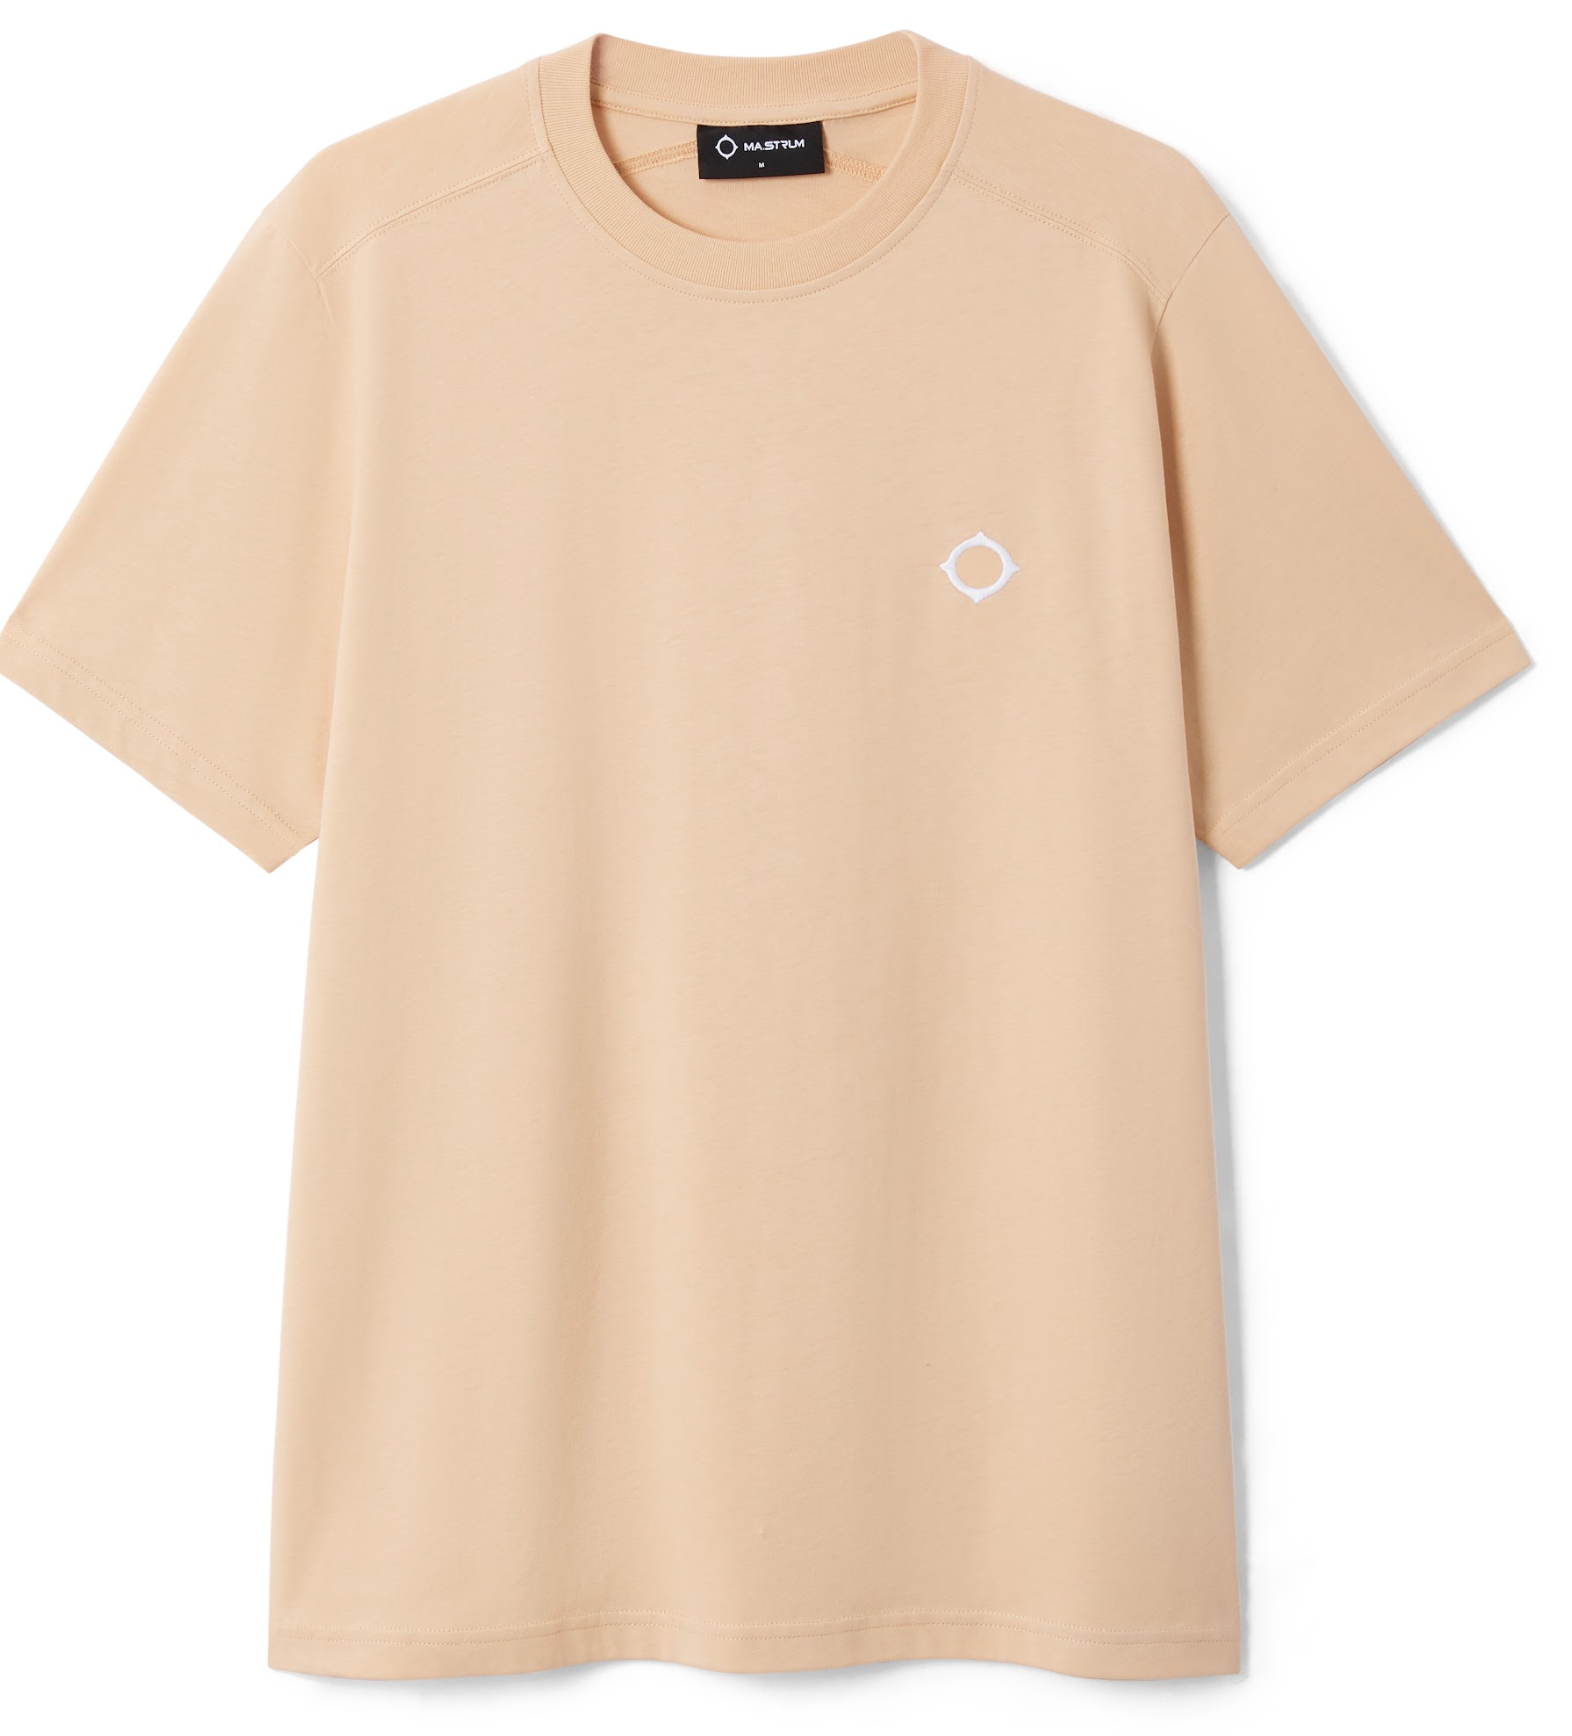 MA. Strum "Resort Collection Icon" Tee Shirt Oatmeal